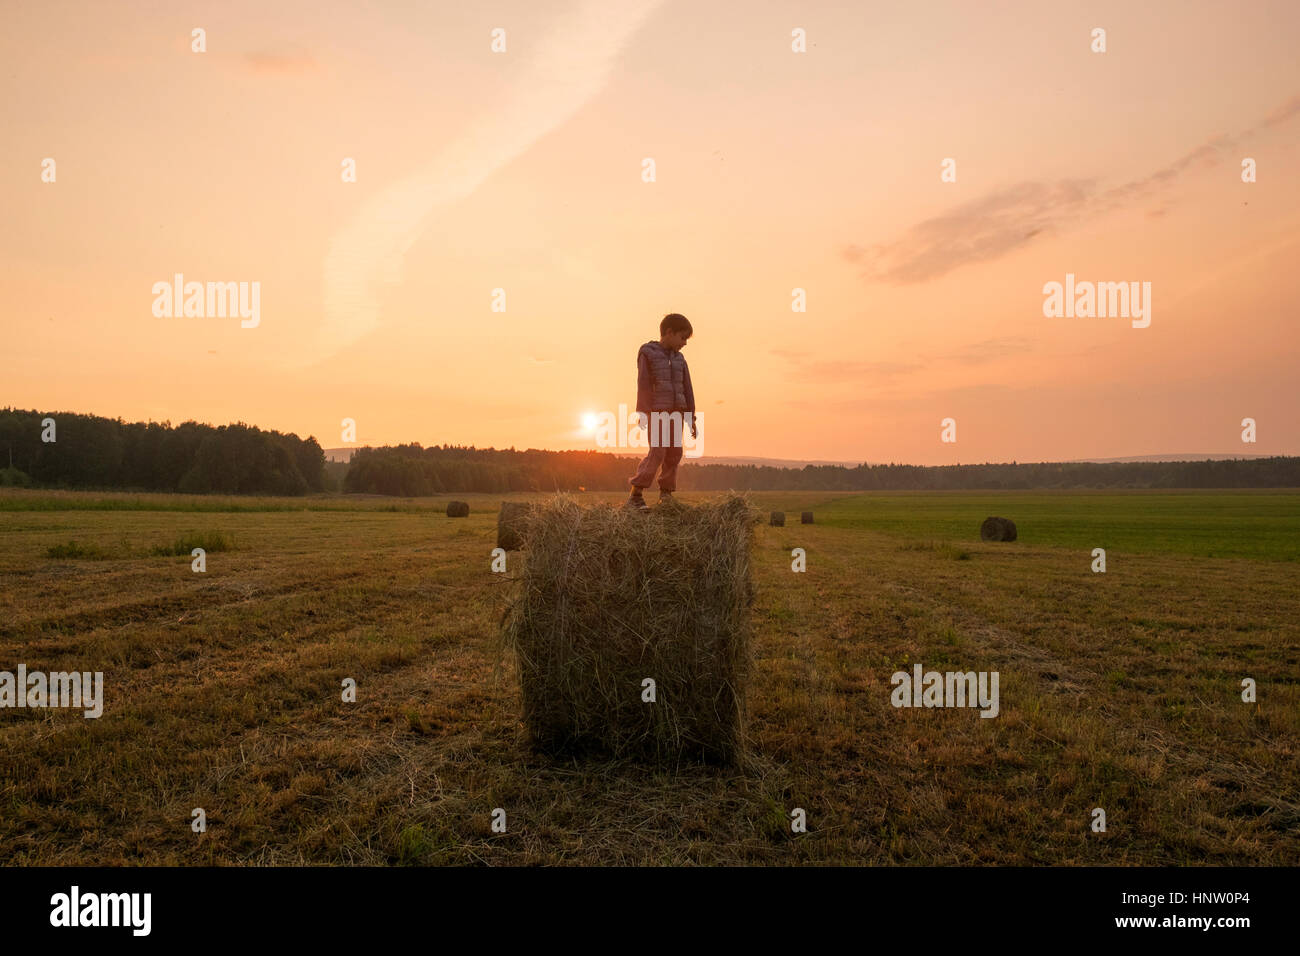 Mari boy standing on hay bale in field, de l'Oural, Russie Banque D'Images